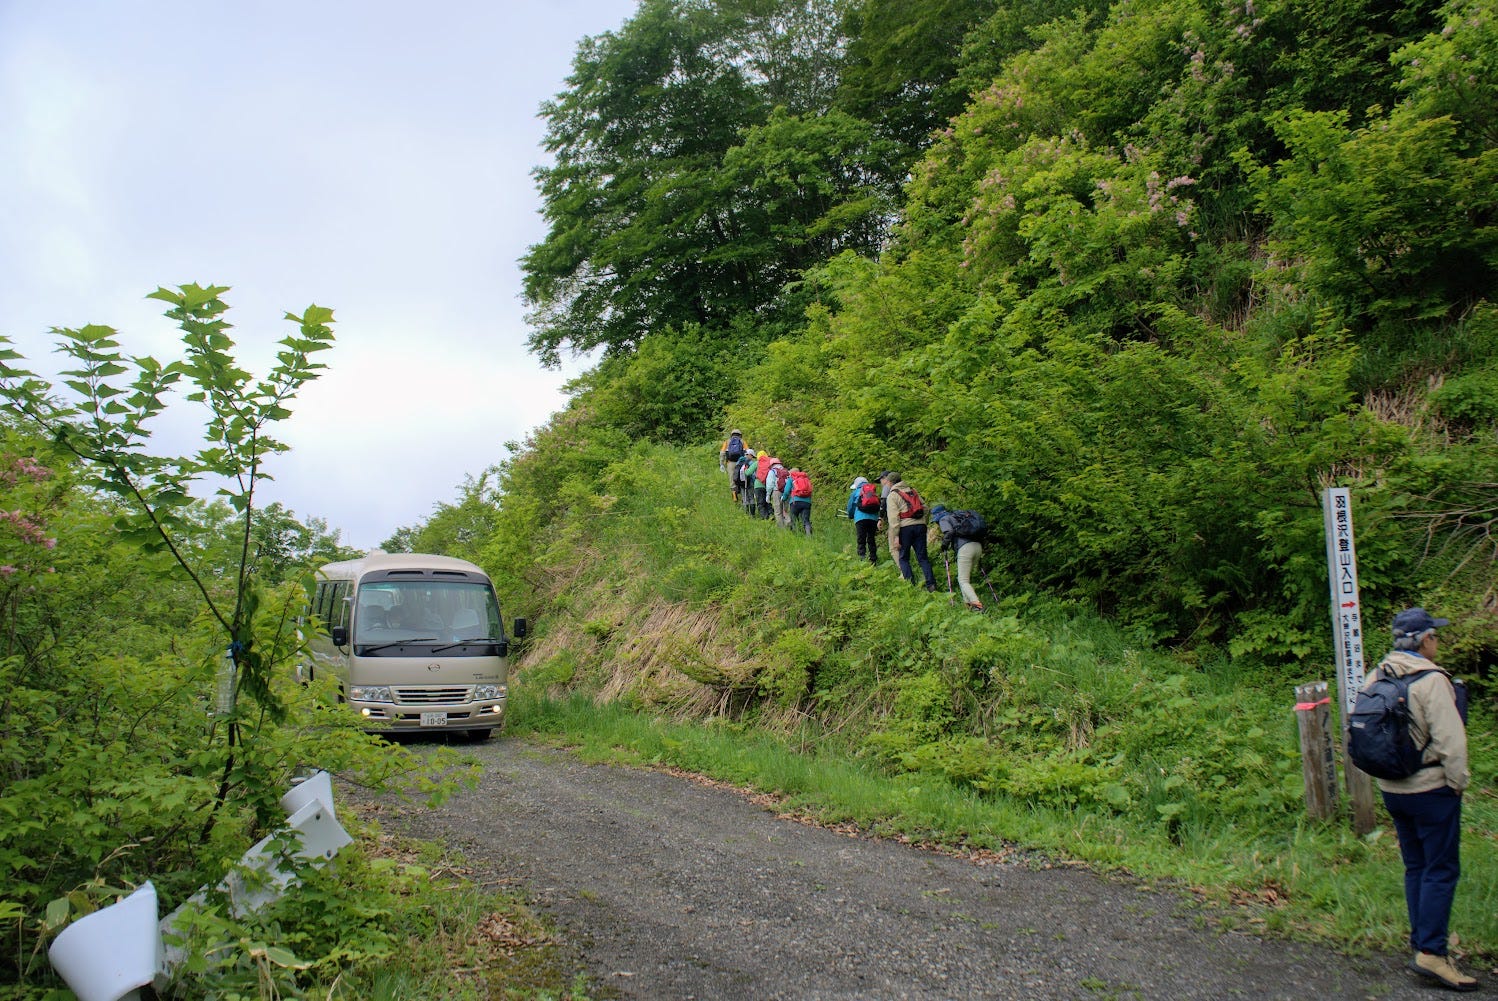 Hikers start walking along the hill at the Hanesawa Trailhead to Yozo-san as a bus waits nearby.